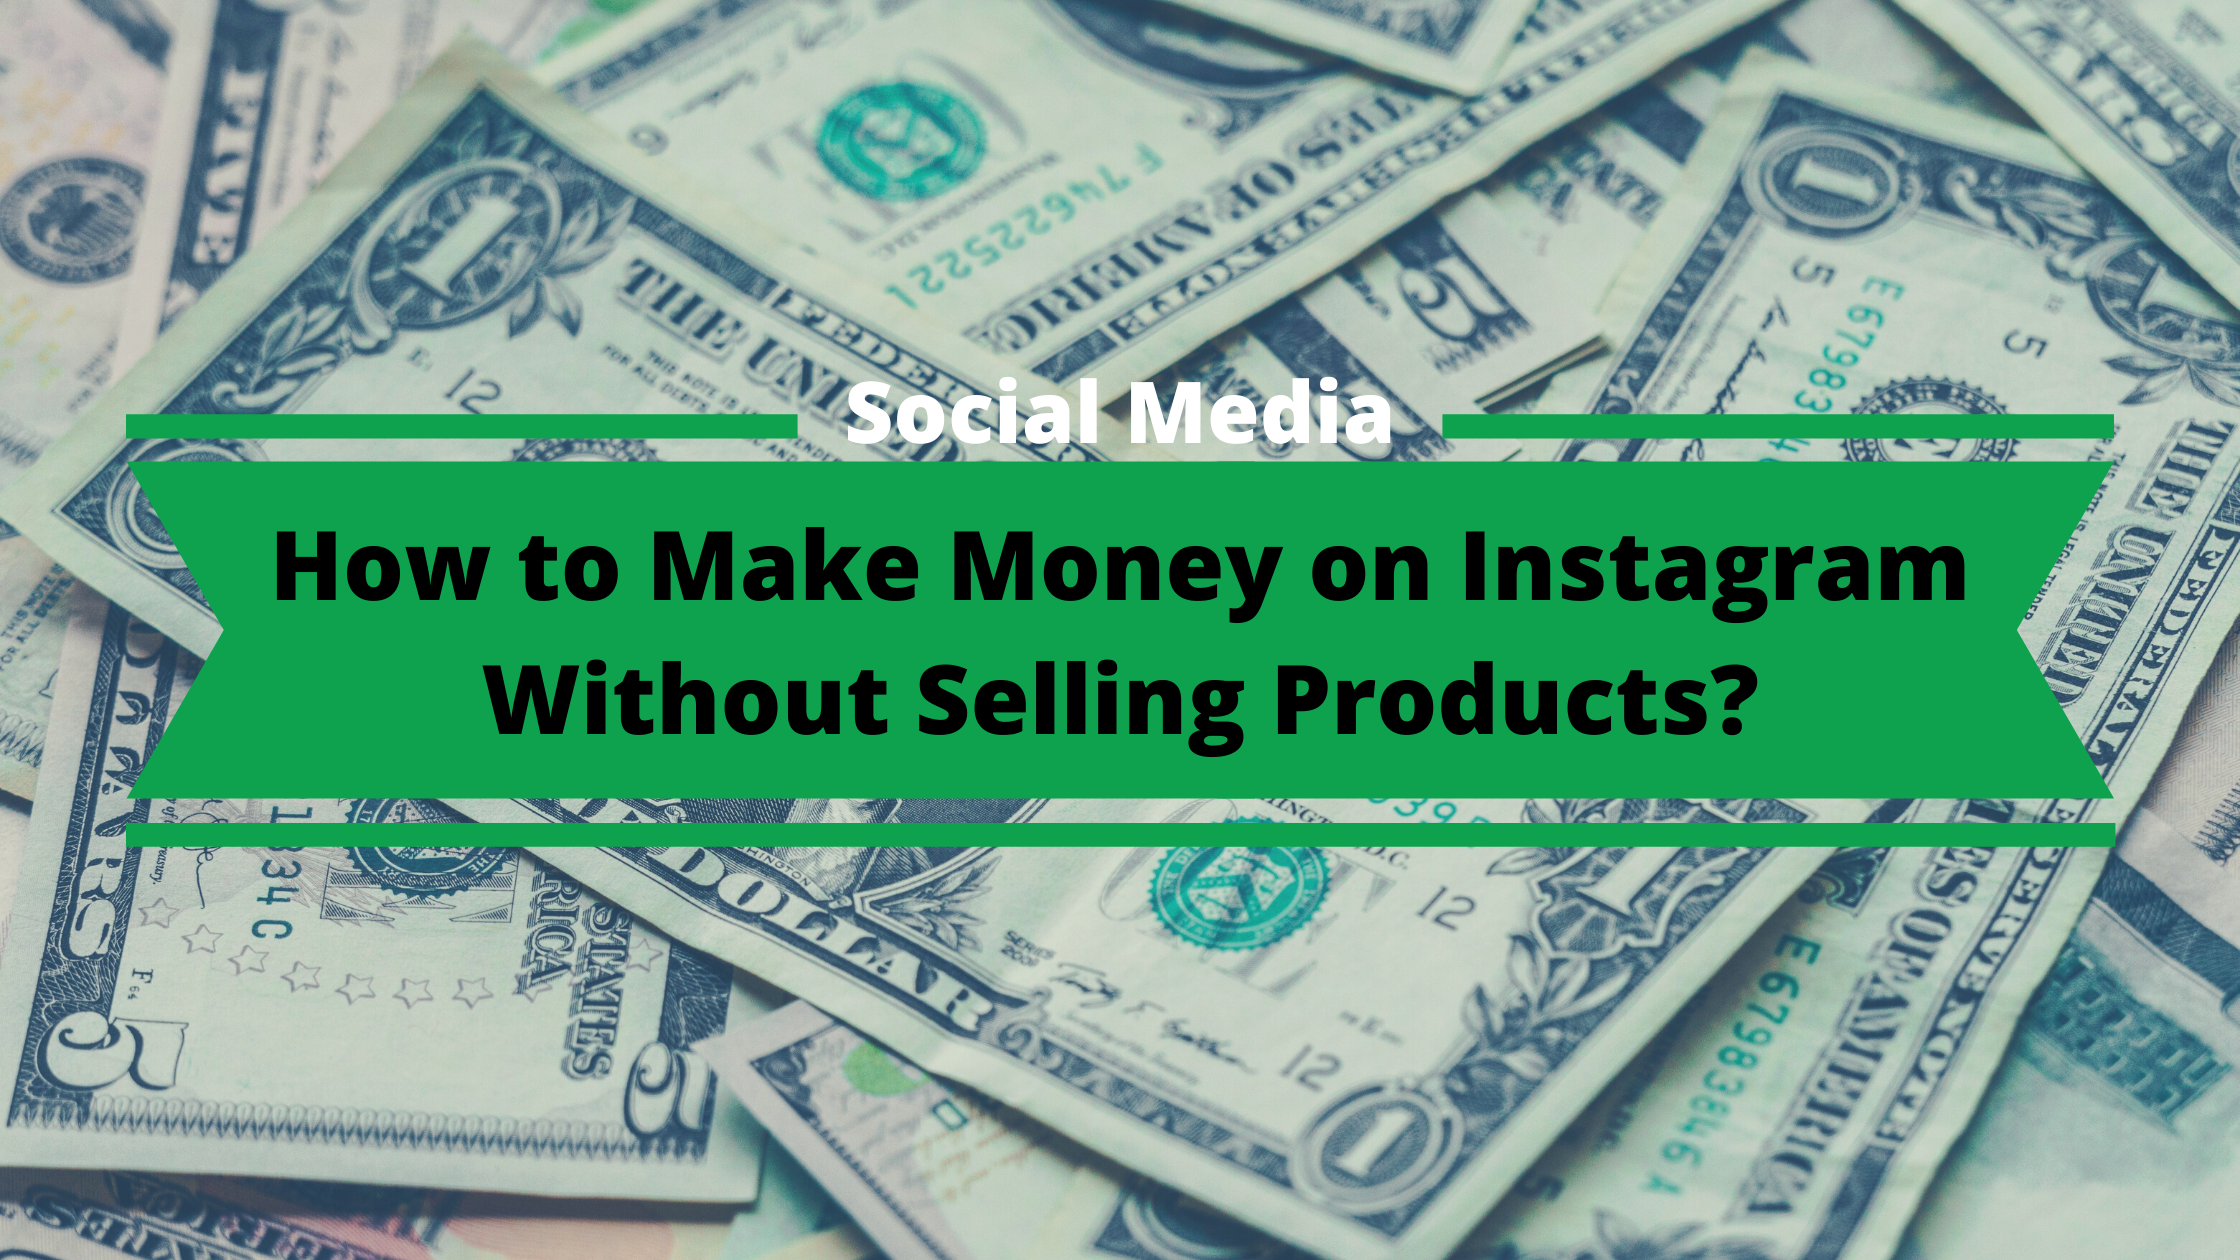 make money on instagram without selling products